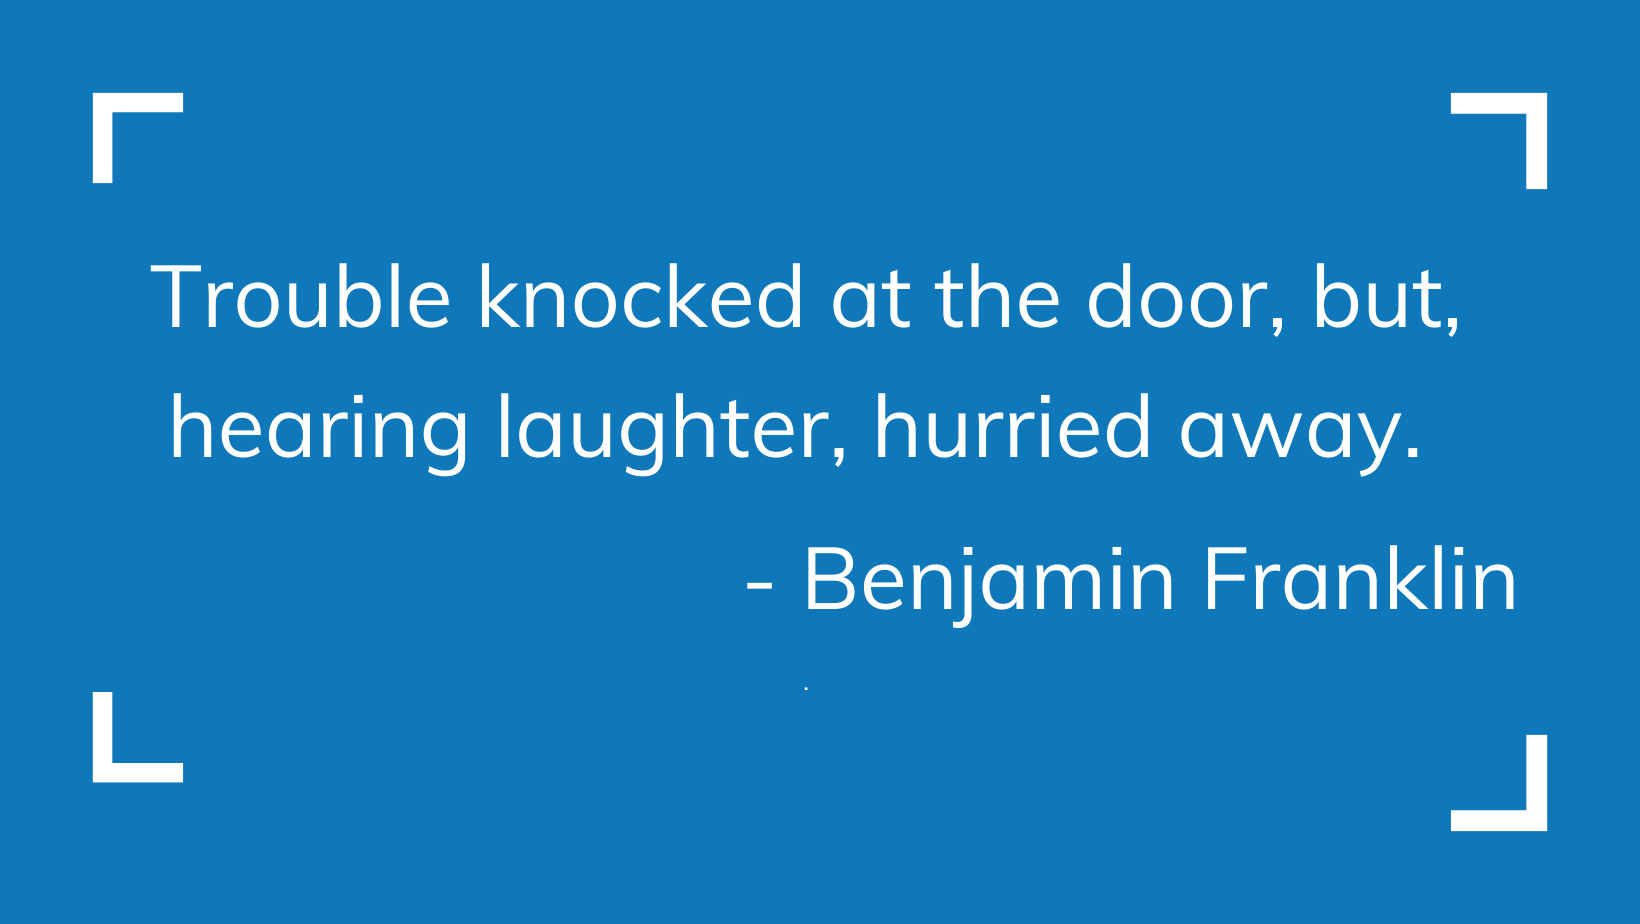 Quote by Benjamin Franklin